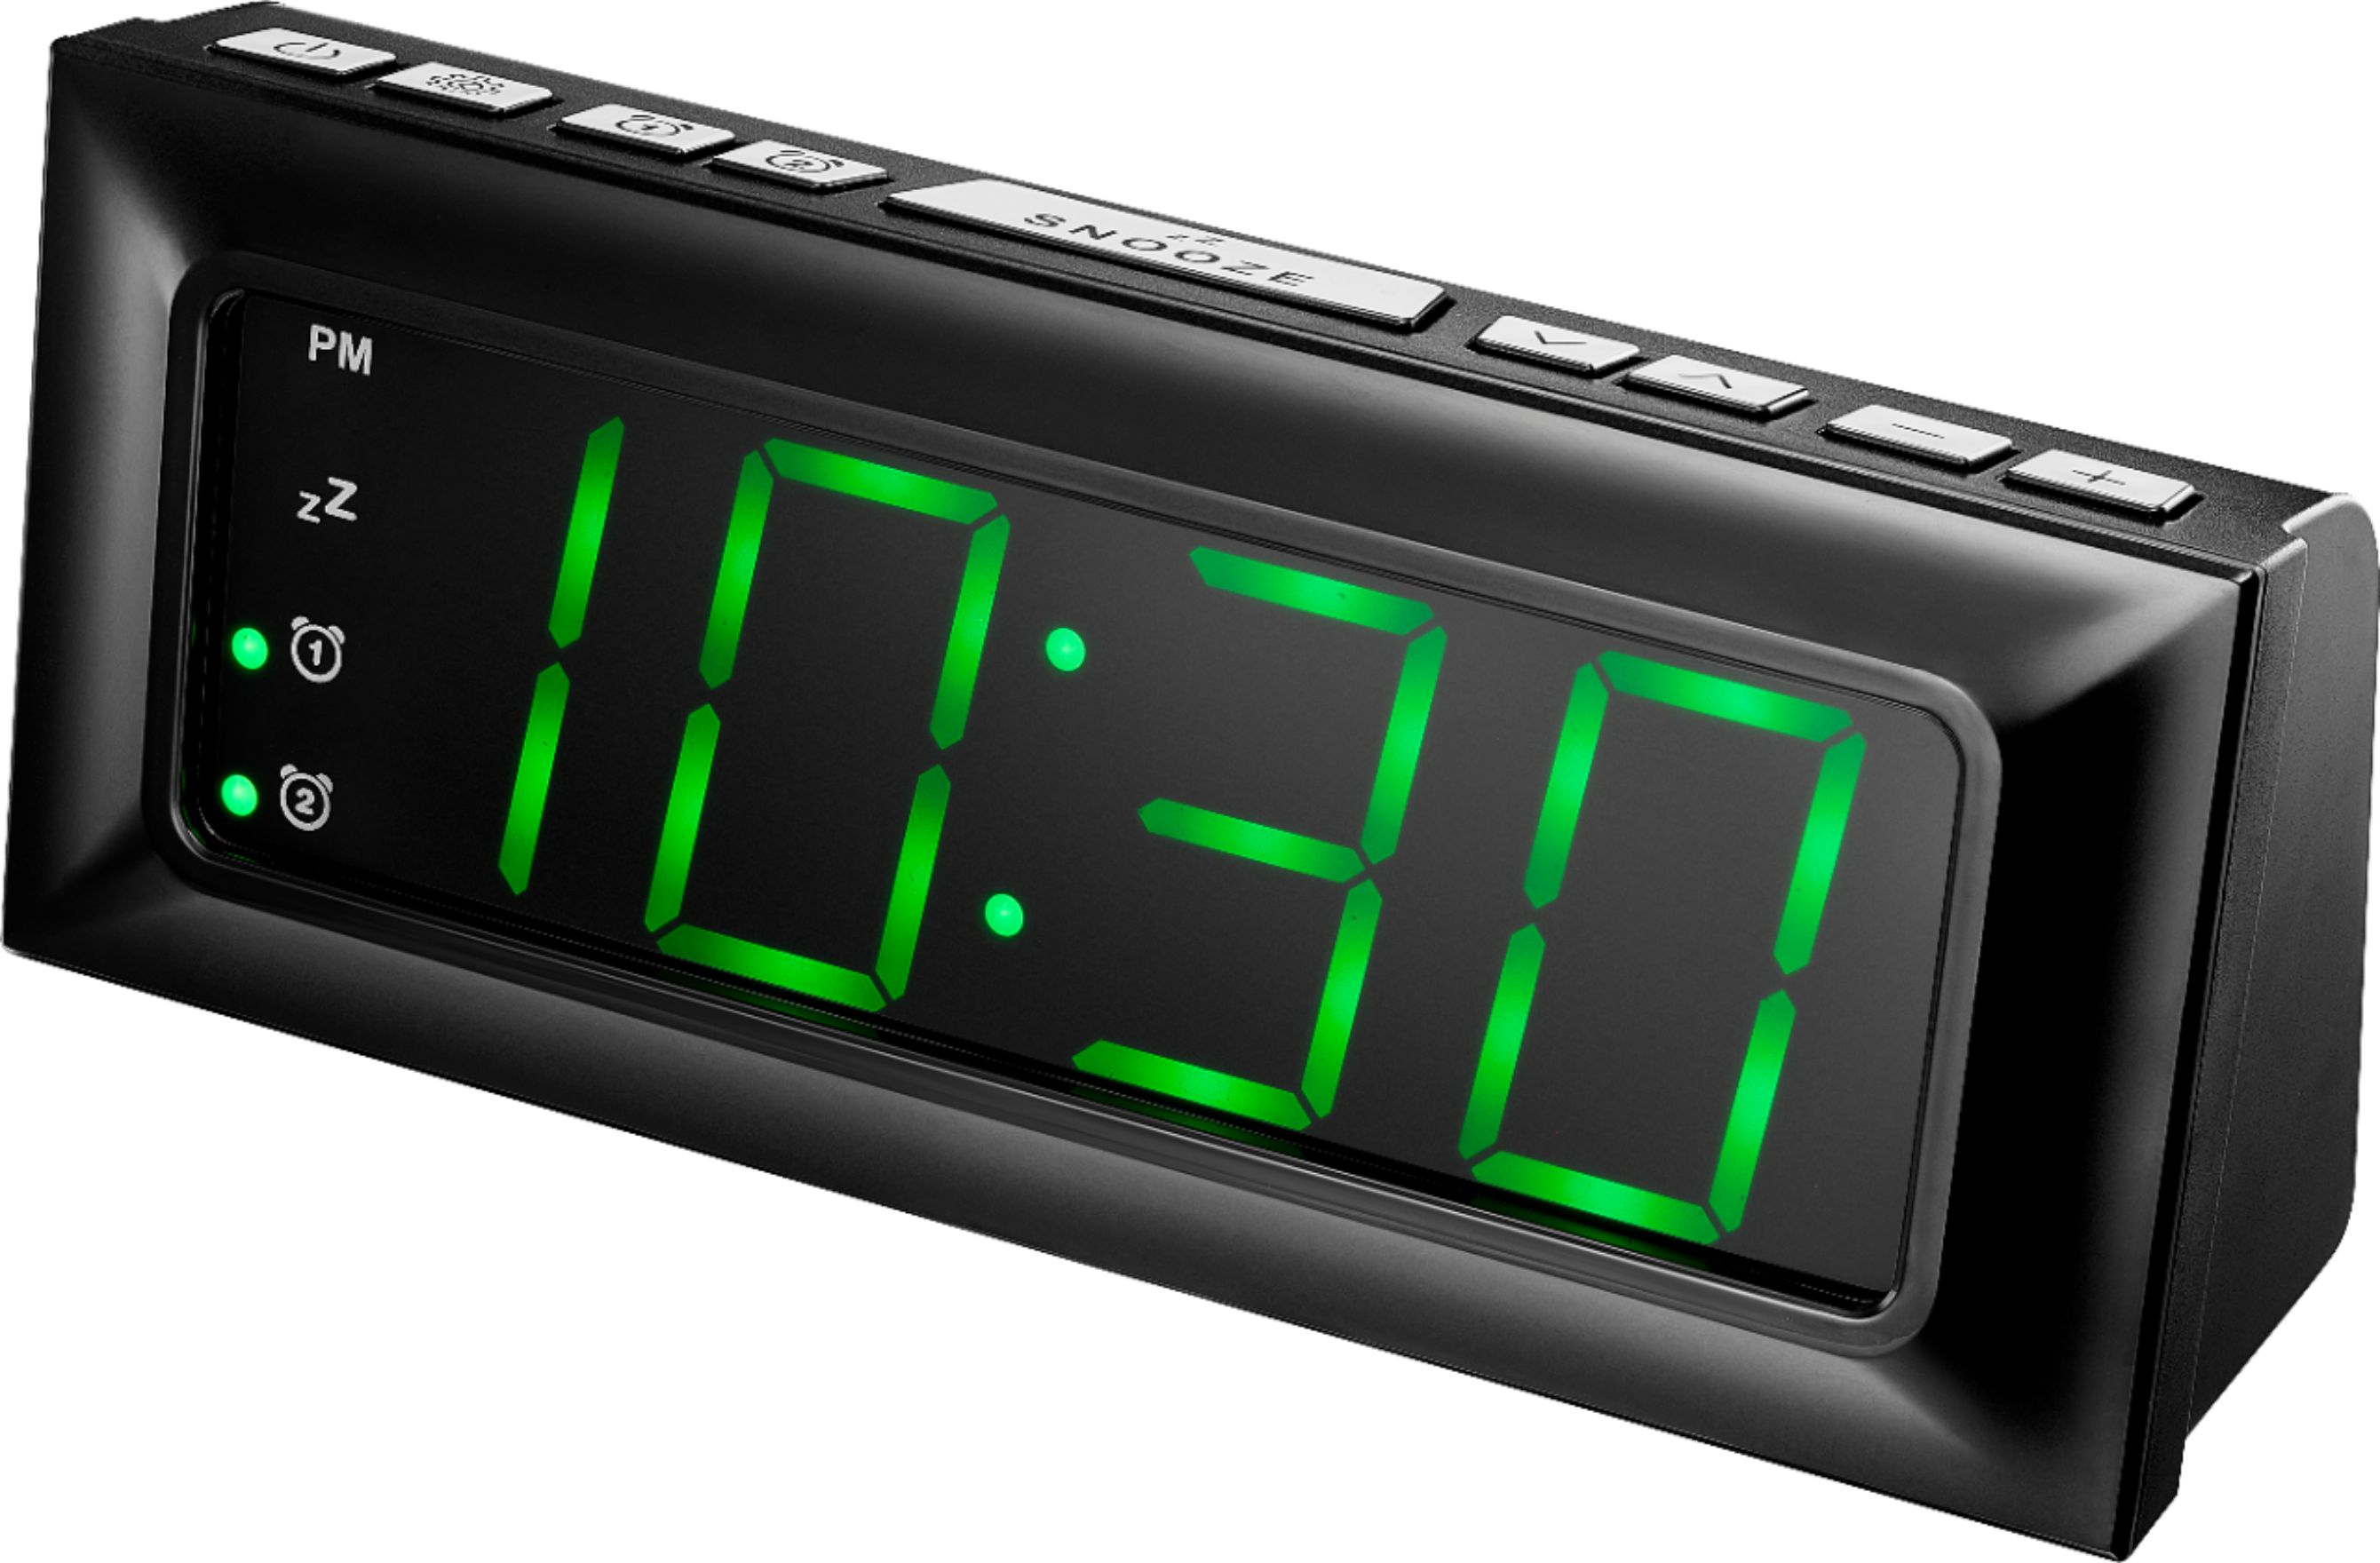 Dual Digital Timer With 3-level Adjustable Alarm Volume On/off Switch